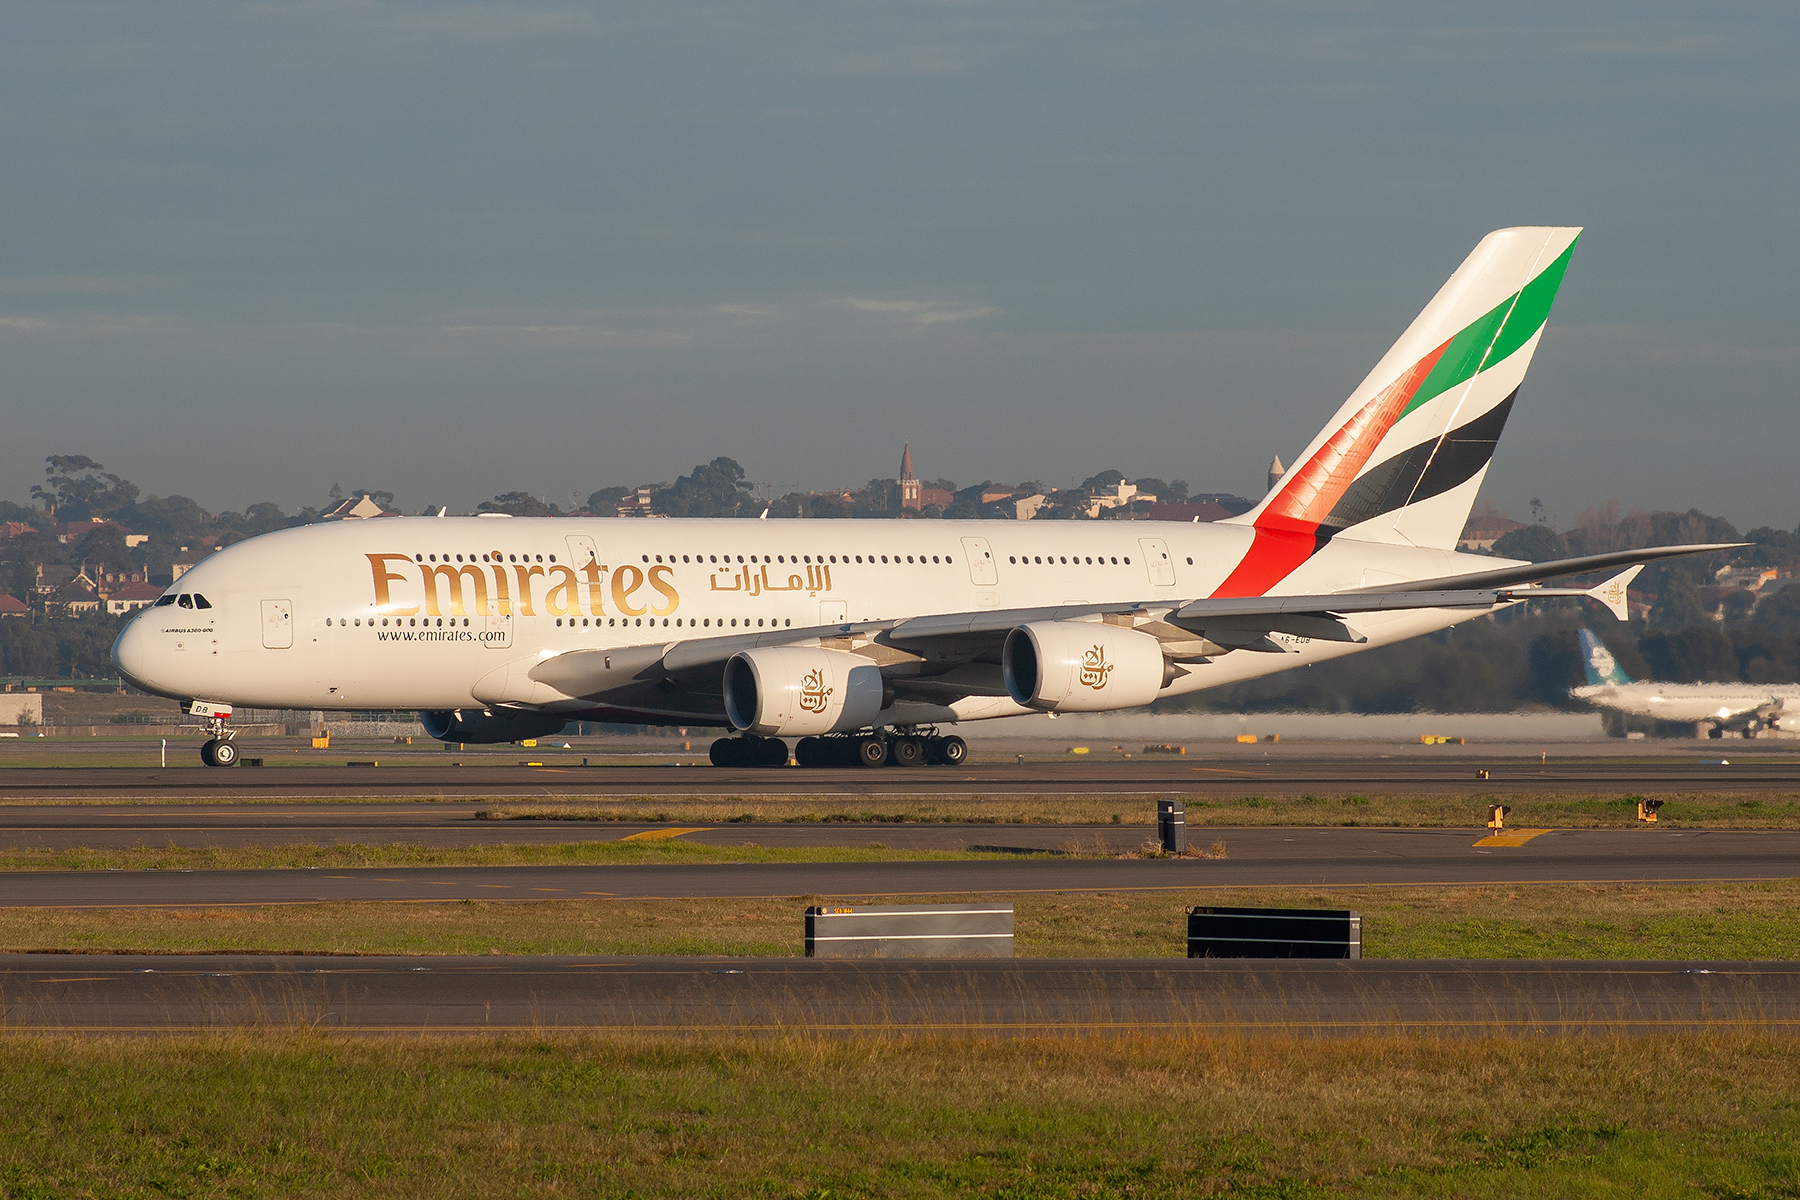 Emirates Airlines Airbus A380-800 A6-EDB at Kingsford Smith